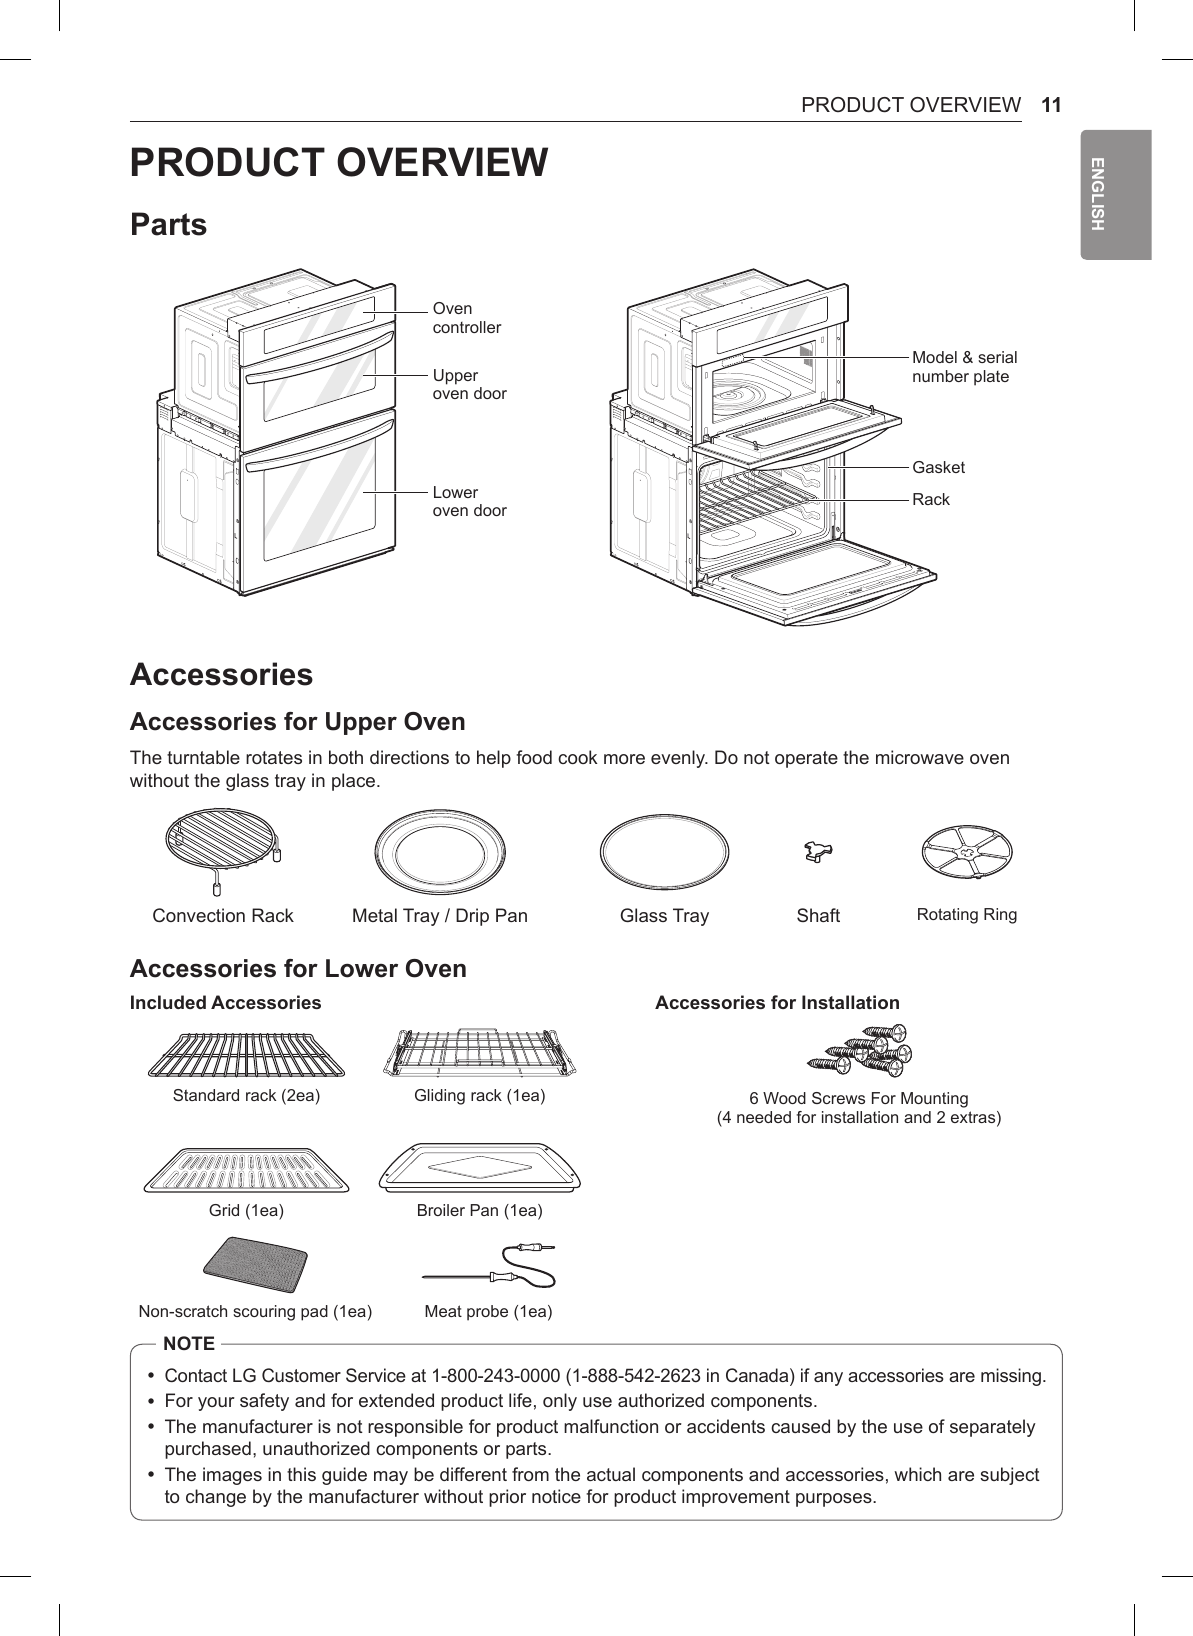 11PRODUCT OVERVIEWENGLISHPRODUCT OVERVIEWPartsOven controllerUpper oven doorLower oven doorModel &amp; serial number plateGasketRackAccessoriesAccessories for Upper OvenThe turntable rotates in both directions to help food cook more evenly. Do not operate the microwave oven without the glass tray in place.Convection Rack Metal Tray / Drip Pan Glass Tray Shaft Rotating RingAccessories for Lower OvenIncluded Accessories  Accessories for InstallationStandard rack (2ea) Gliding rack (1ea) 6 Wood Screws For Mounting (4 needed for installation and 2 extras)Grid (1ea) Broiler Pan (1ea)Non-scratch scouring pad (1ea) Meat probe (1ea)NOTE •Contact LG Customer Service at 1-800-243-0000 (1-888-542-2623 in Canada) if any accessories are missing. •For your safety and for extended product life, only use authorized components. •The manufacturer is not responsible for product malfunction or accidents caused by the use of separately purchased, unauthorized components or parts. •The images in this guide may be different from the actual components and accessories, which are subject to change by the manufacturer without prior notice for product improvement purposes.